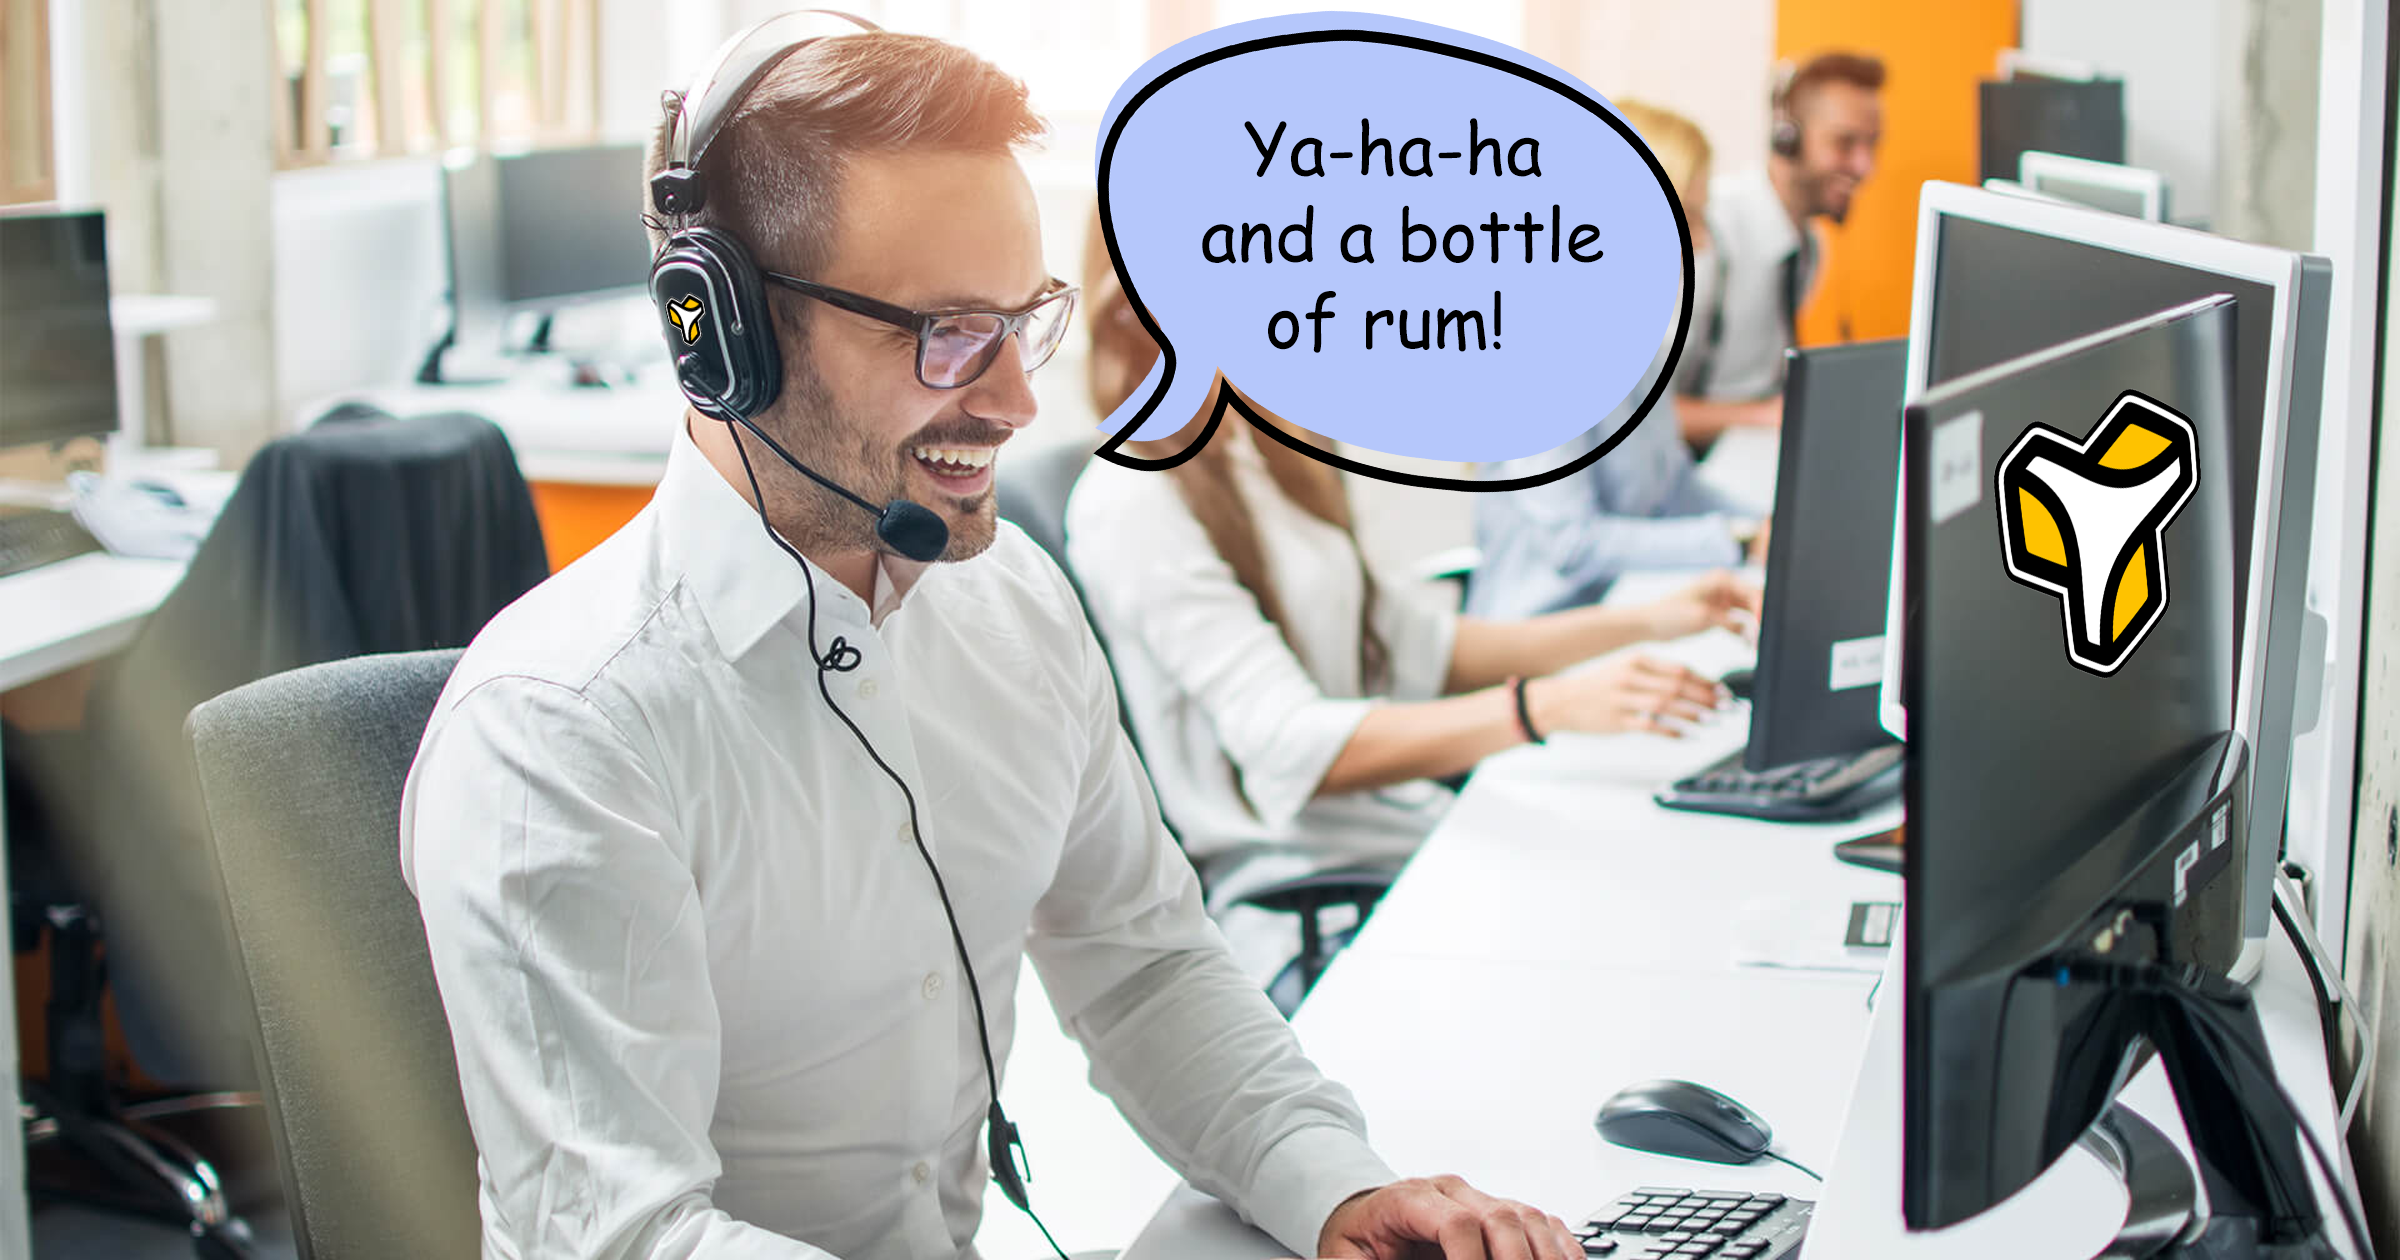 Tech Support Questions from Yahaha